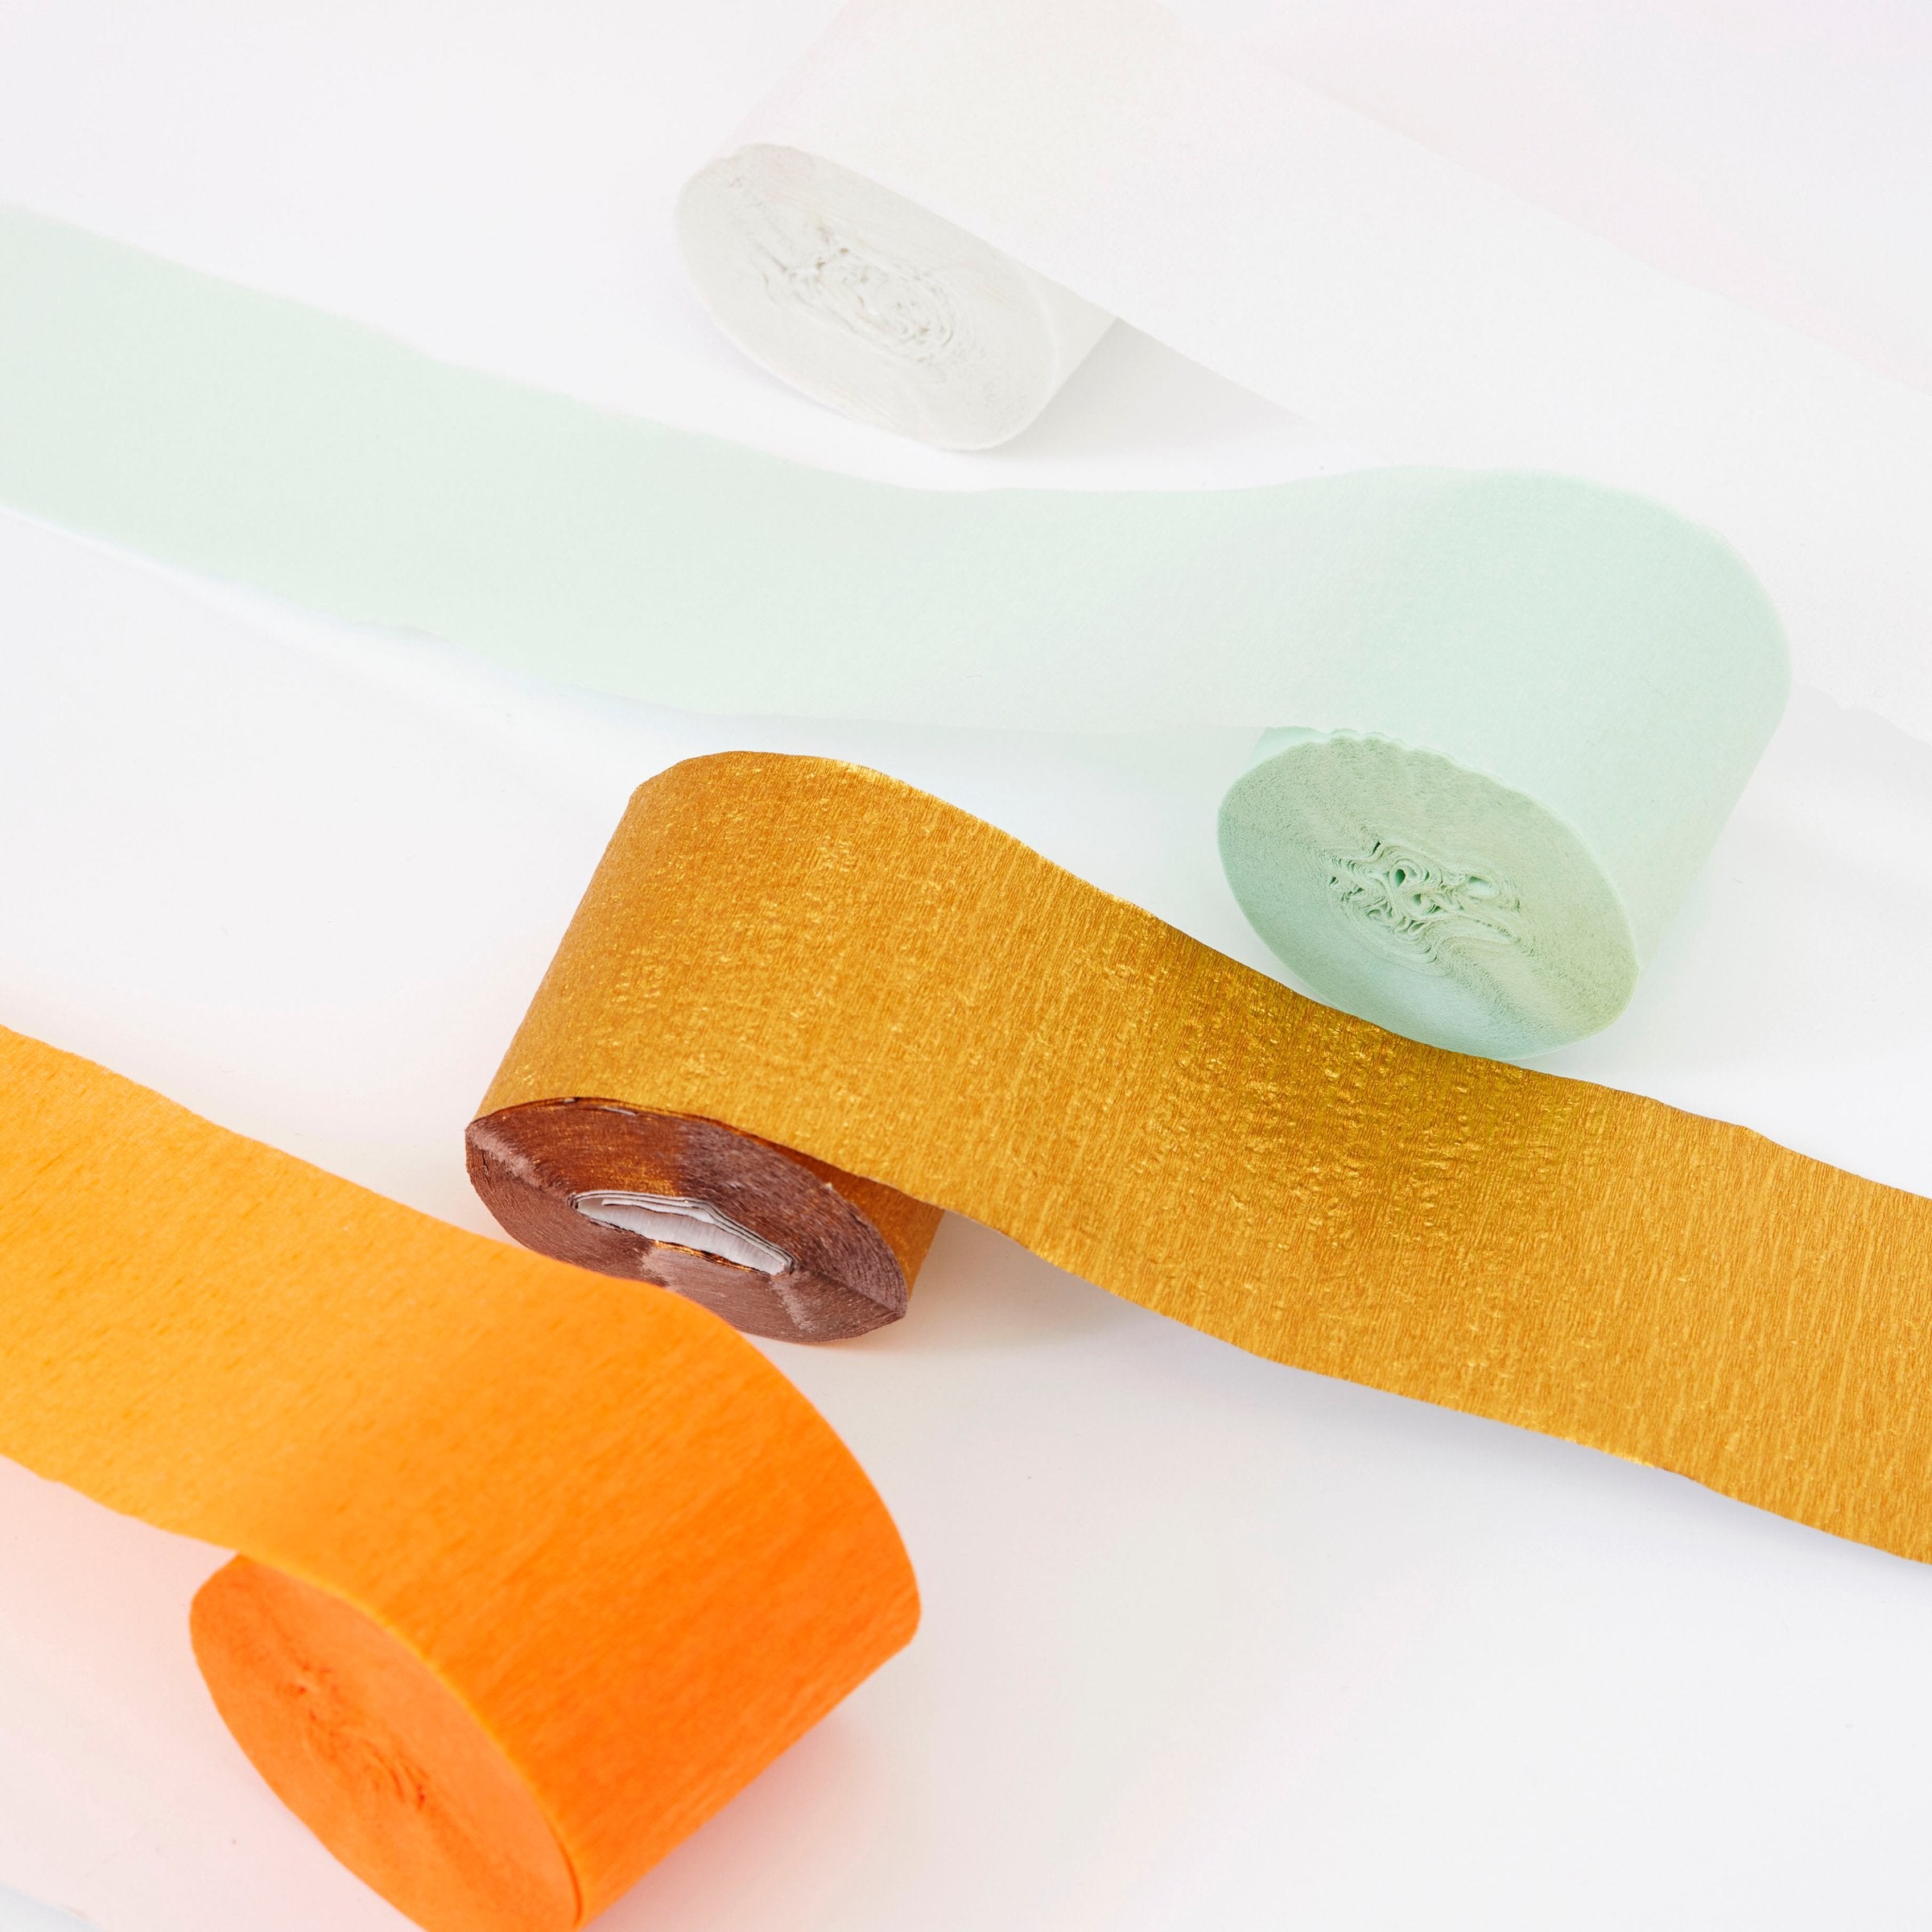 Decorate your Halloween party with these colorful crepe paper streamers.